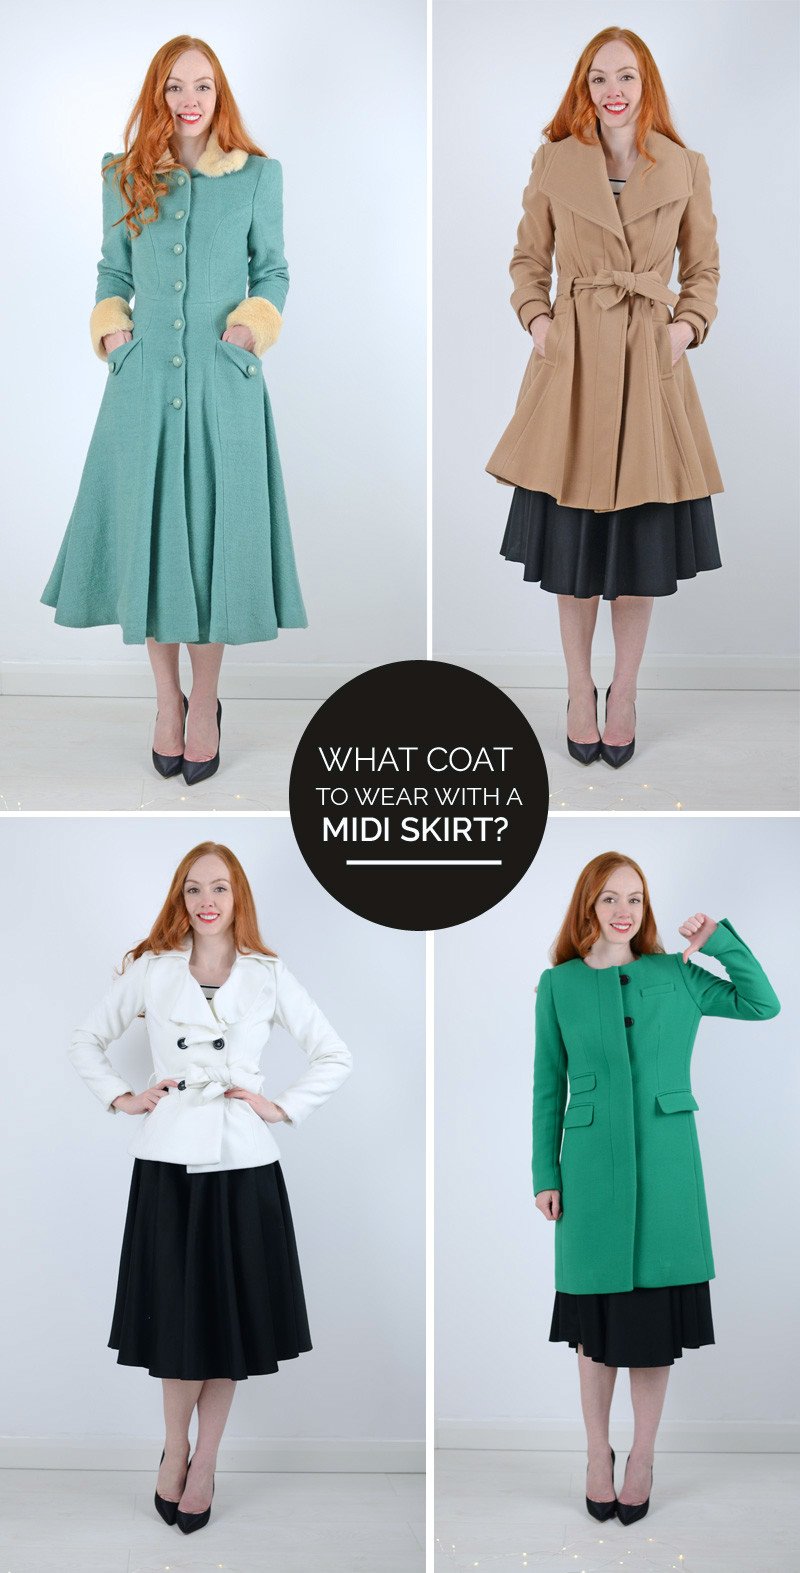 what coat to wear with a midi skirt?